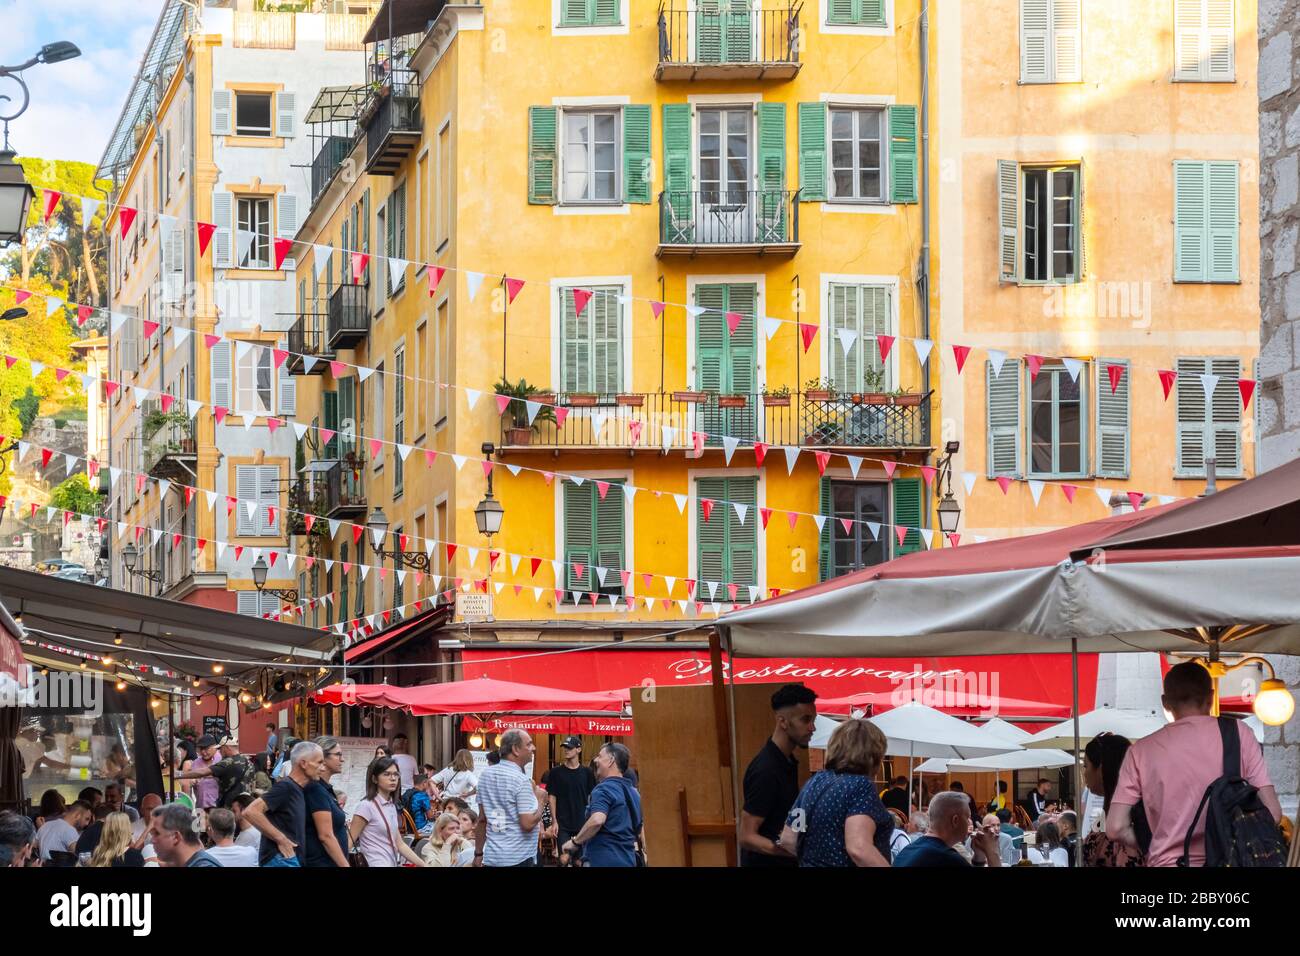 A busy, crowded Place Rossetti Square of shops and cafes in the Old Town Vieux Nice district of Nice, France, on the Riviera. Stock Photo